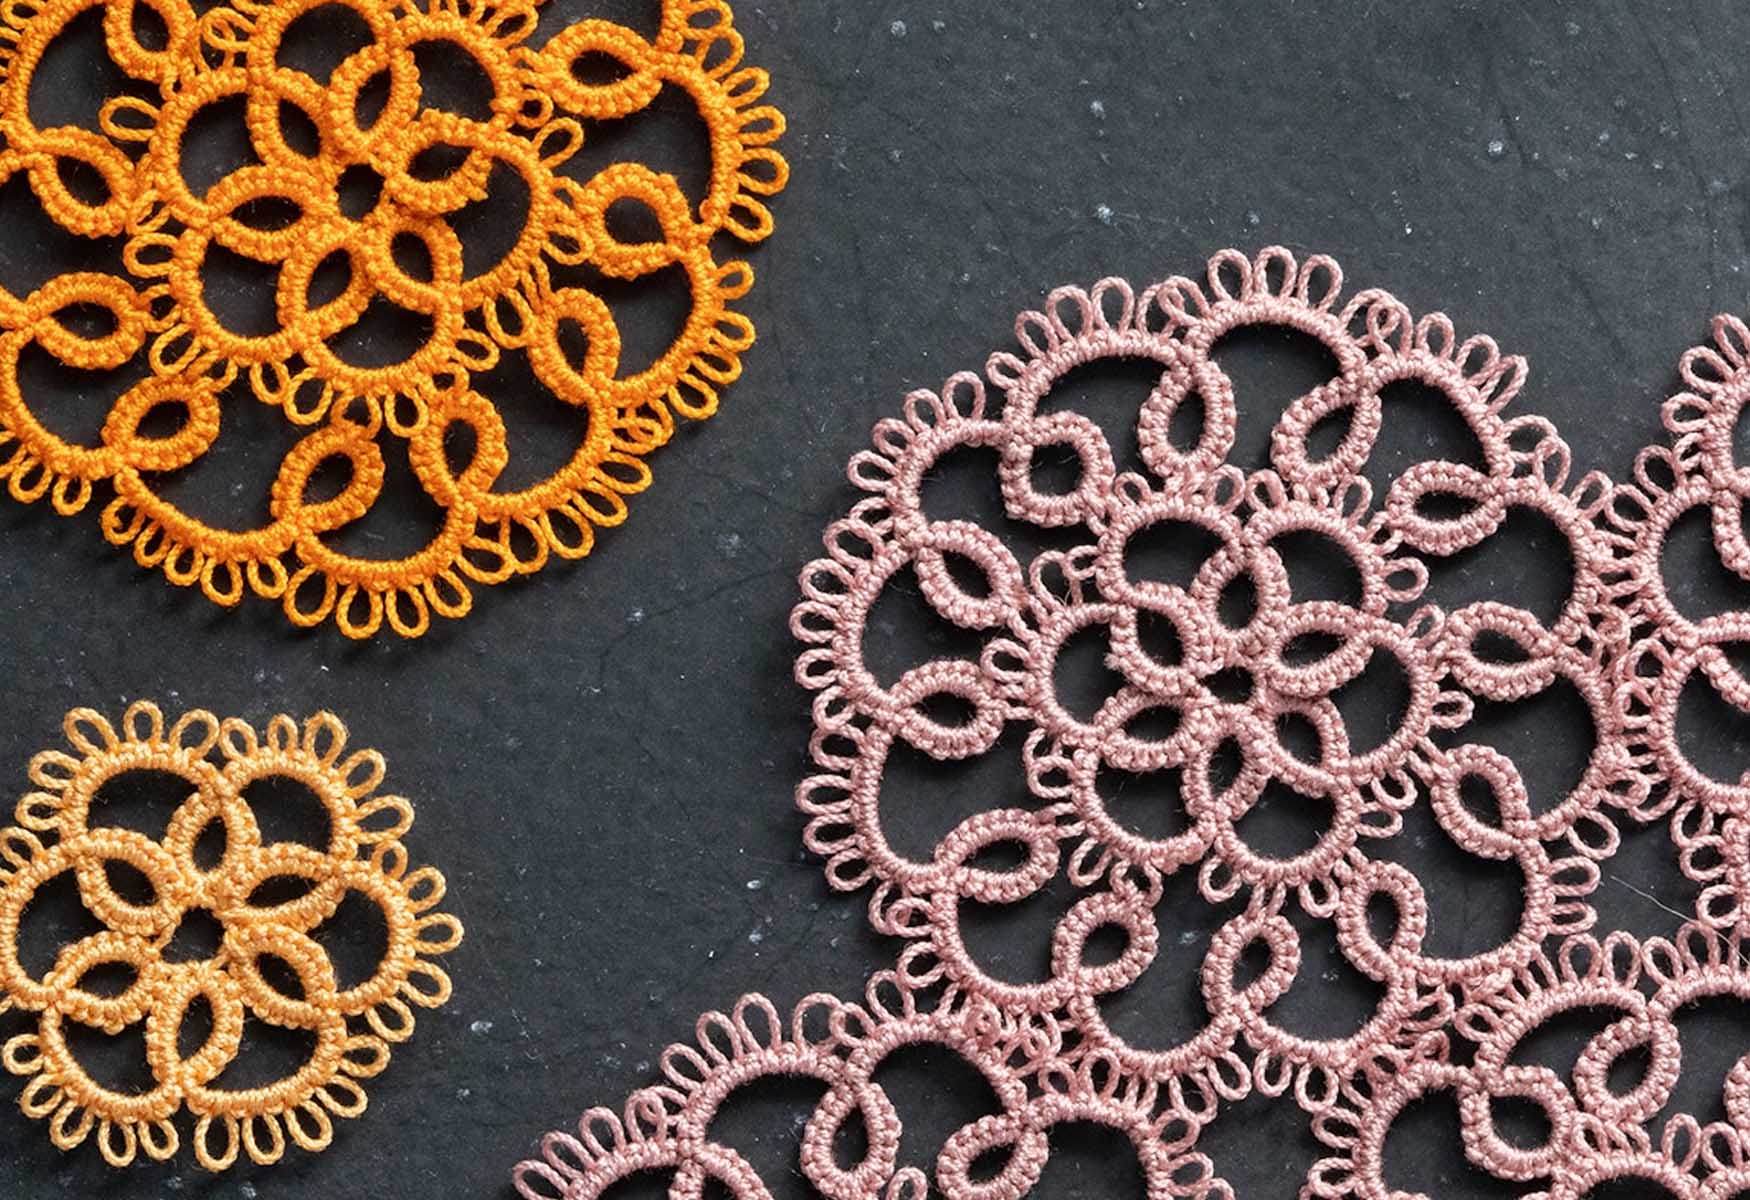 13-extraordinary-facts-about-tatting